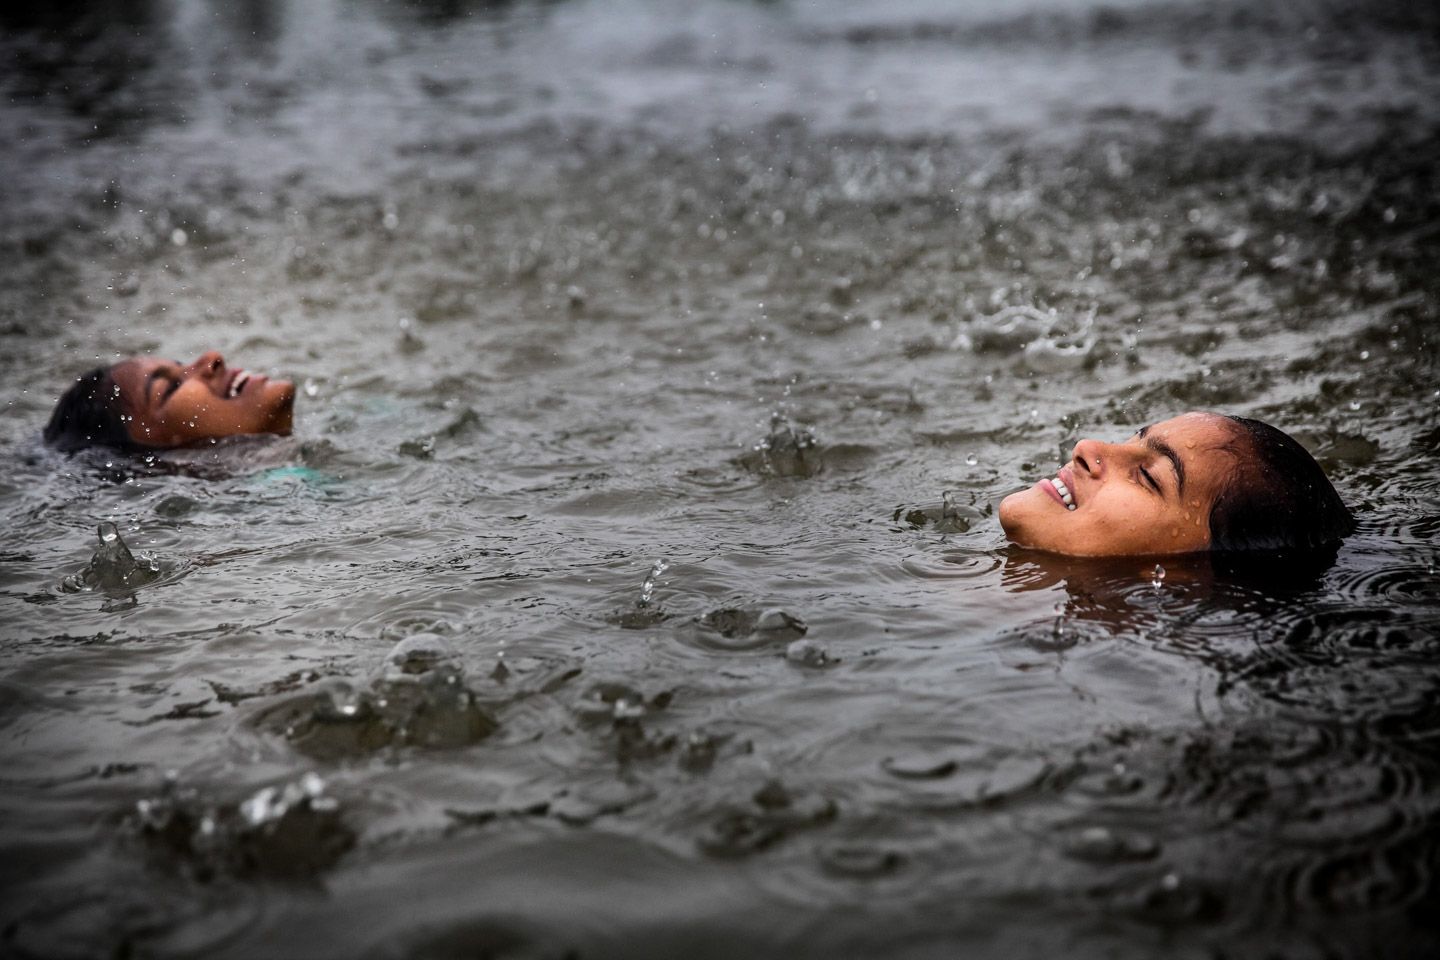 Two young girls in the water with only their faces showing, smiling, looking up into falling rain.